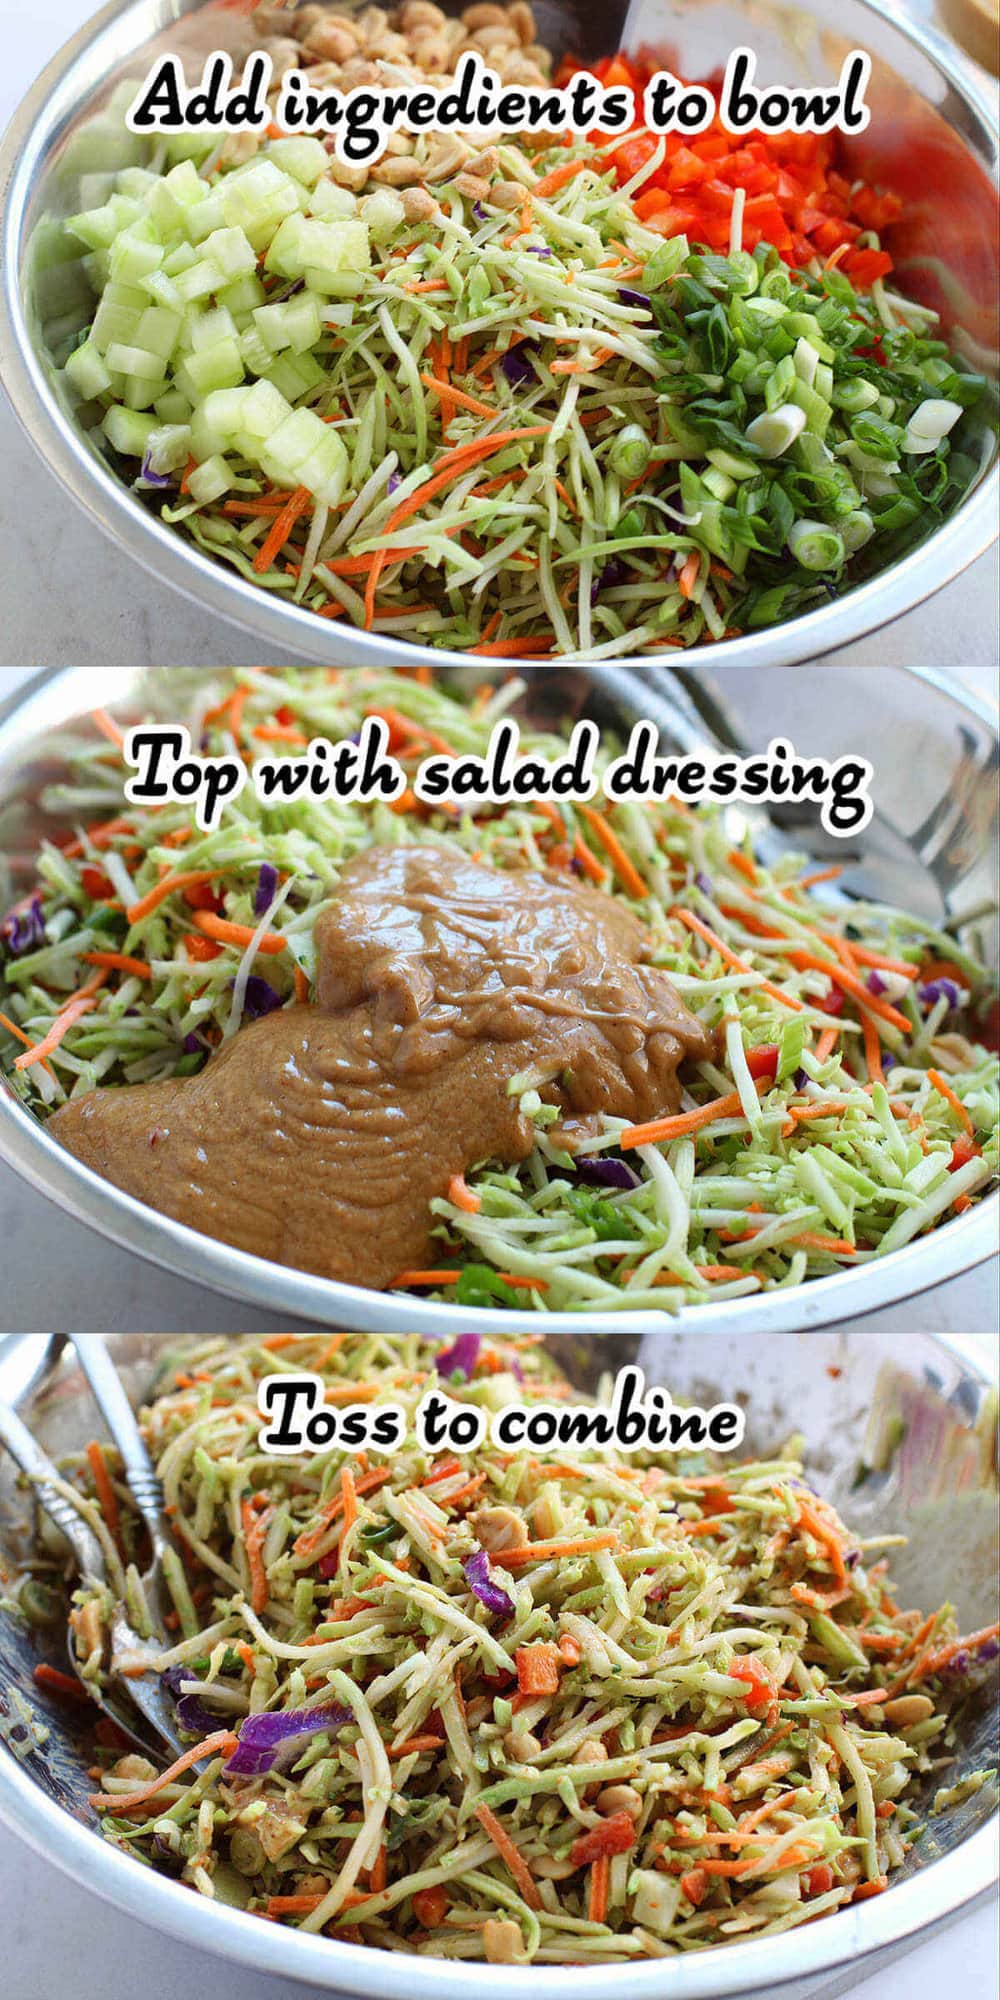 Photos of step by step instructions to make Thai Crunch Salad